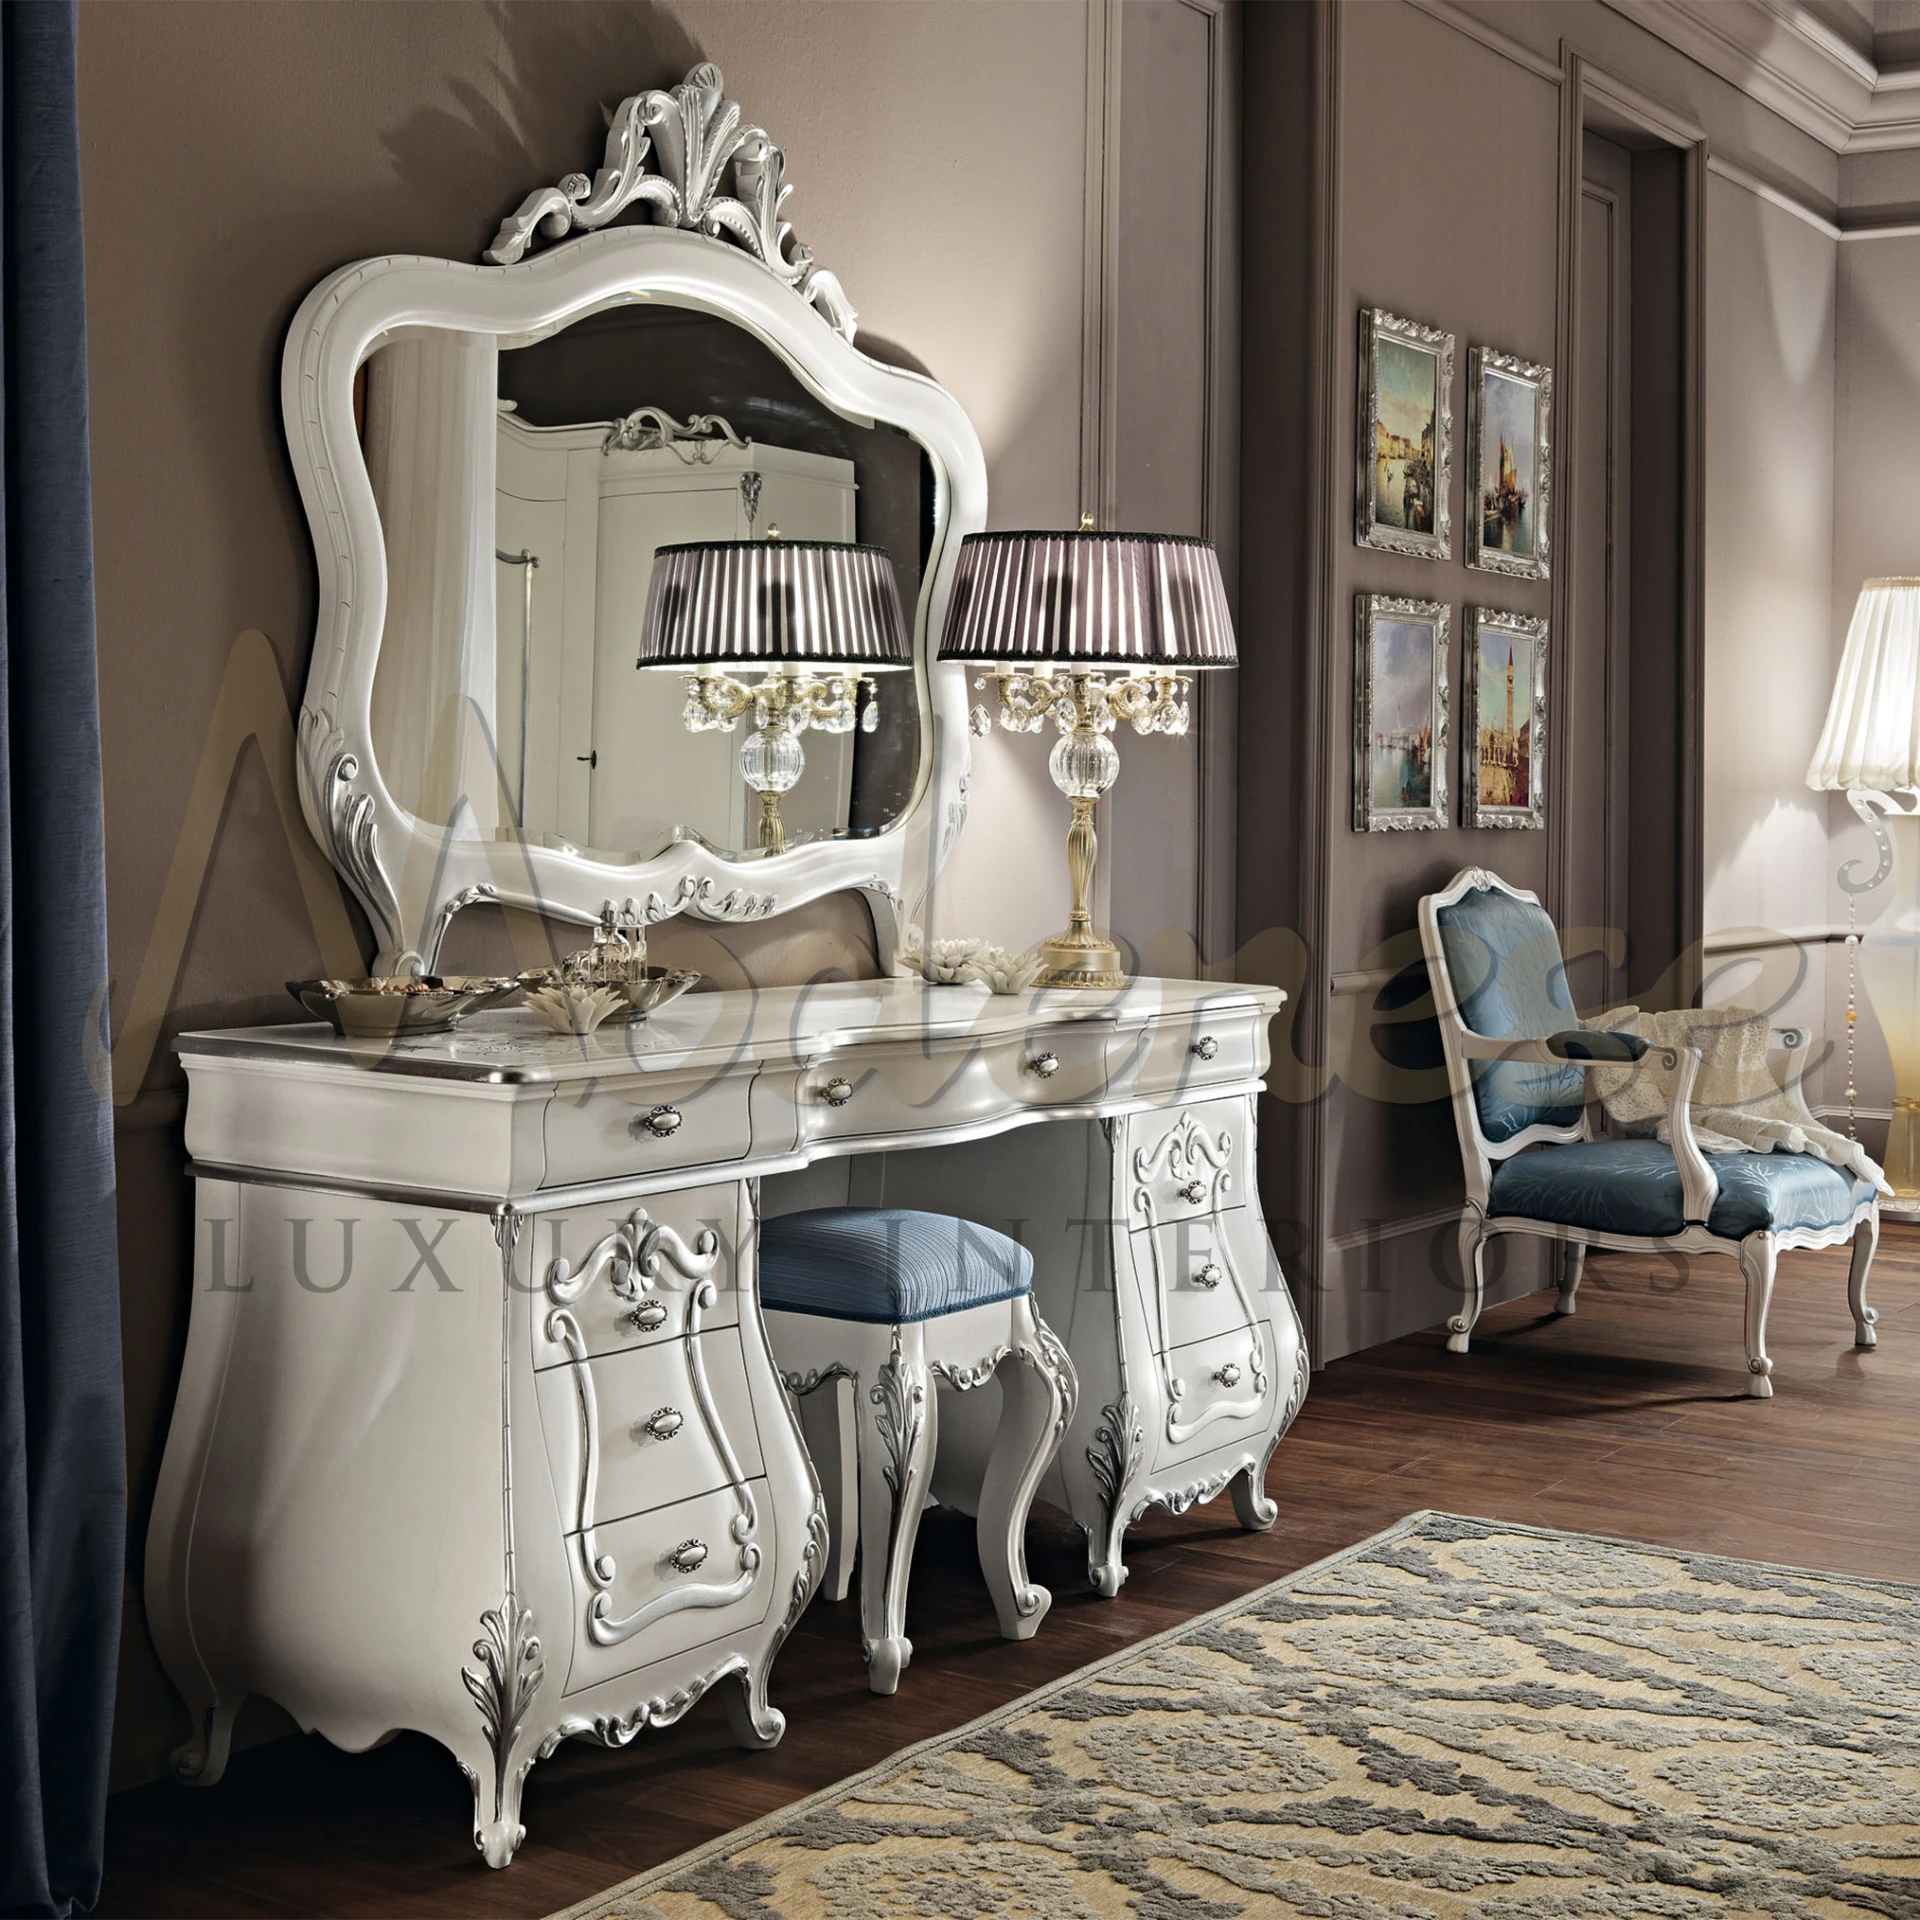 Reflective silver dressing table with ornate carvings and hardware, paired with a stool with blue fabric seat and a classic table lamp with striped shade.